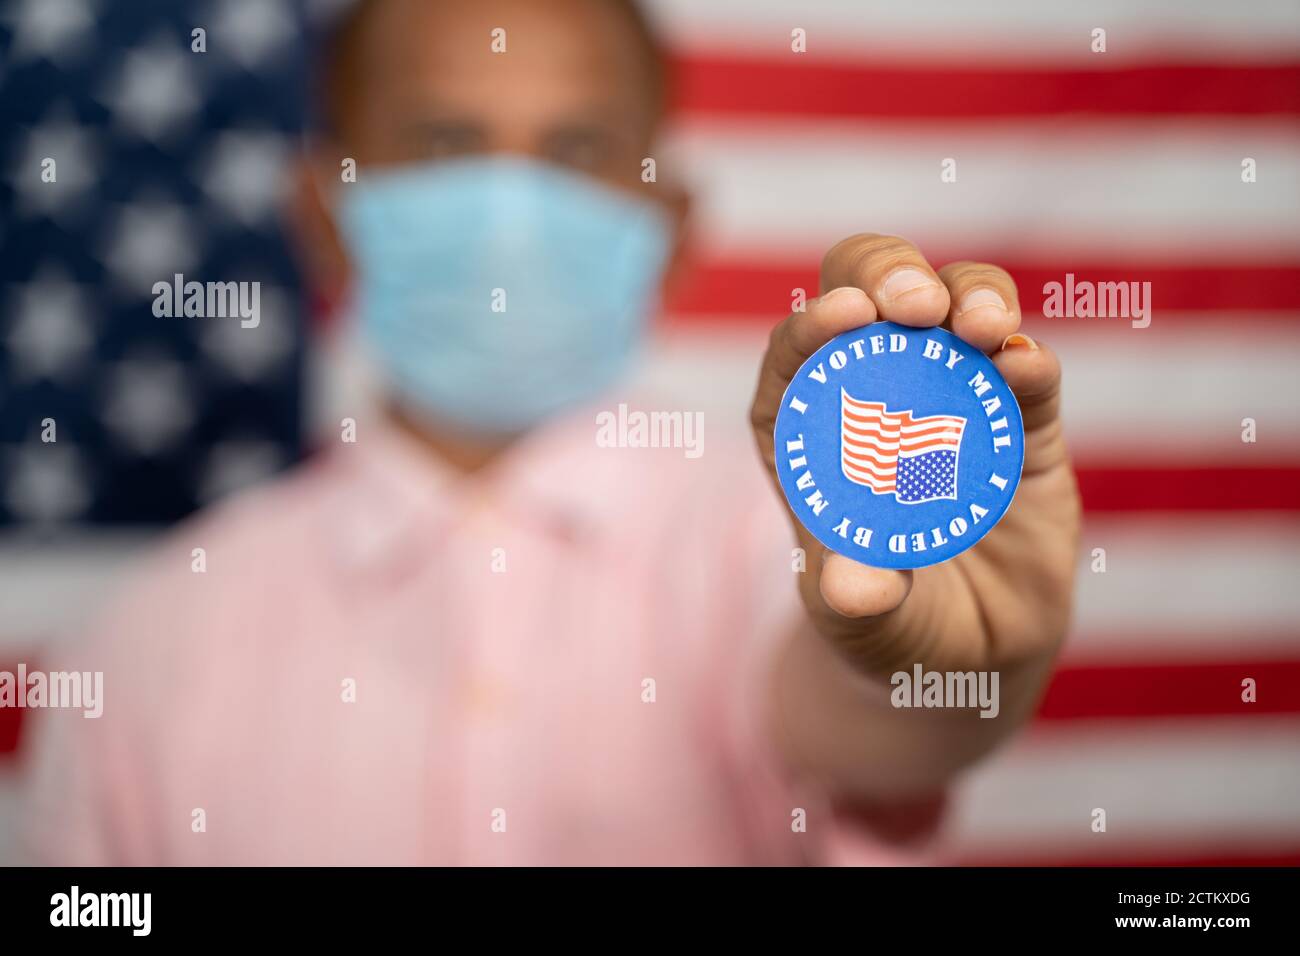 Man in medical mask showing I voted by mail sticker with US flag as background - Concept of mail in voting at USA election. Stock Photo